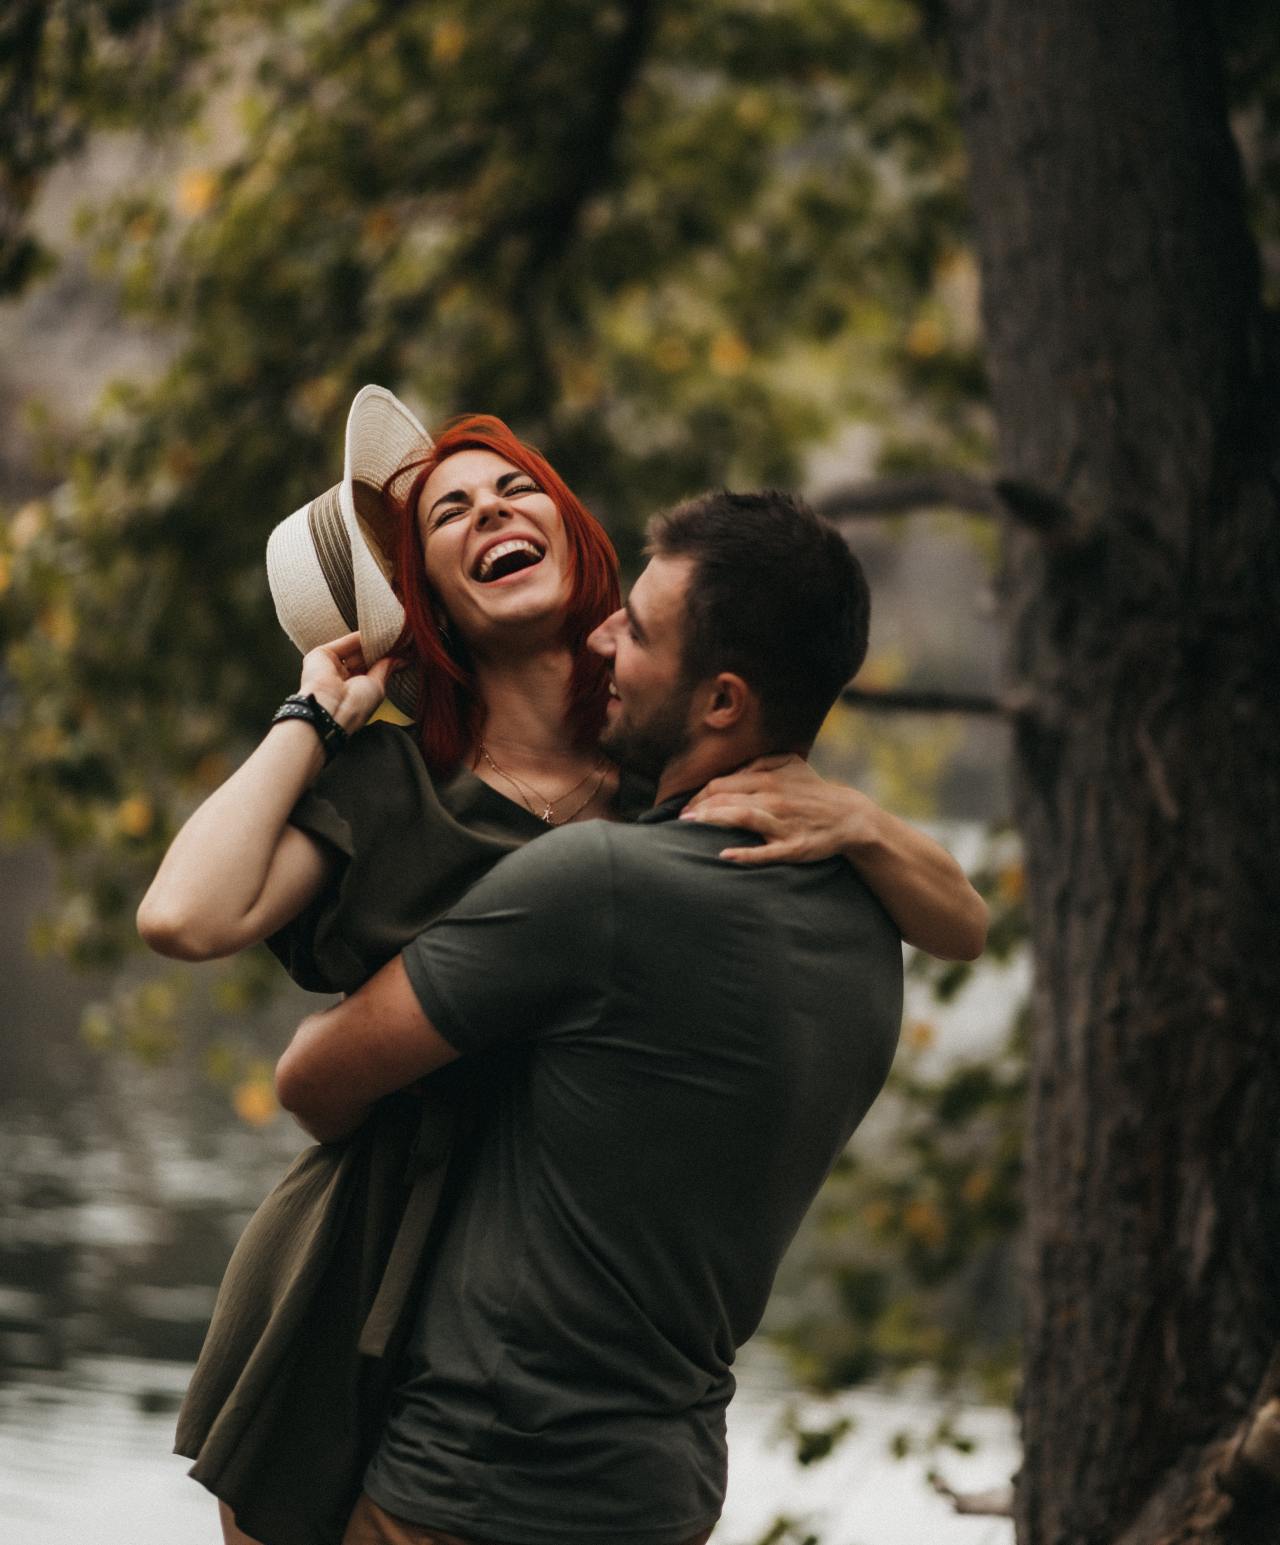 21 Men Reveal What Women Do To Give Them Butterflies